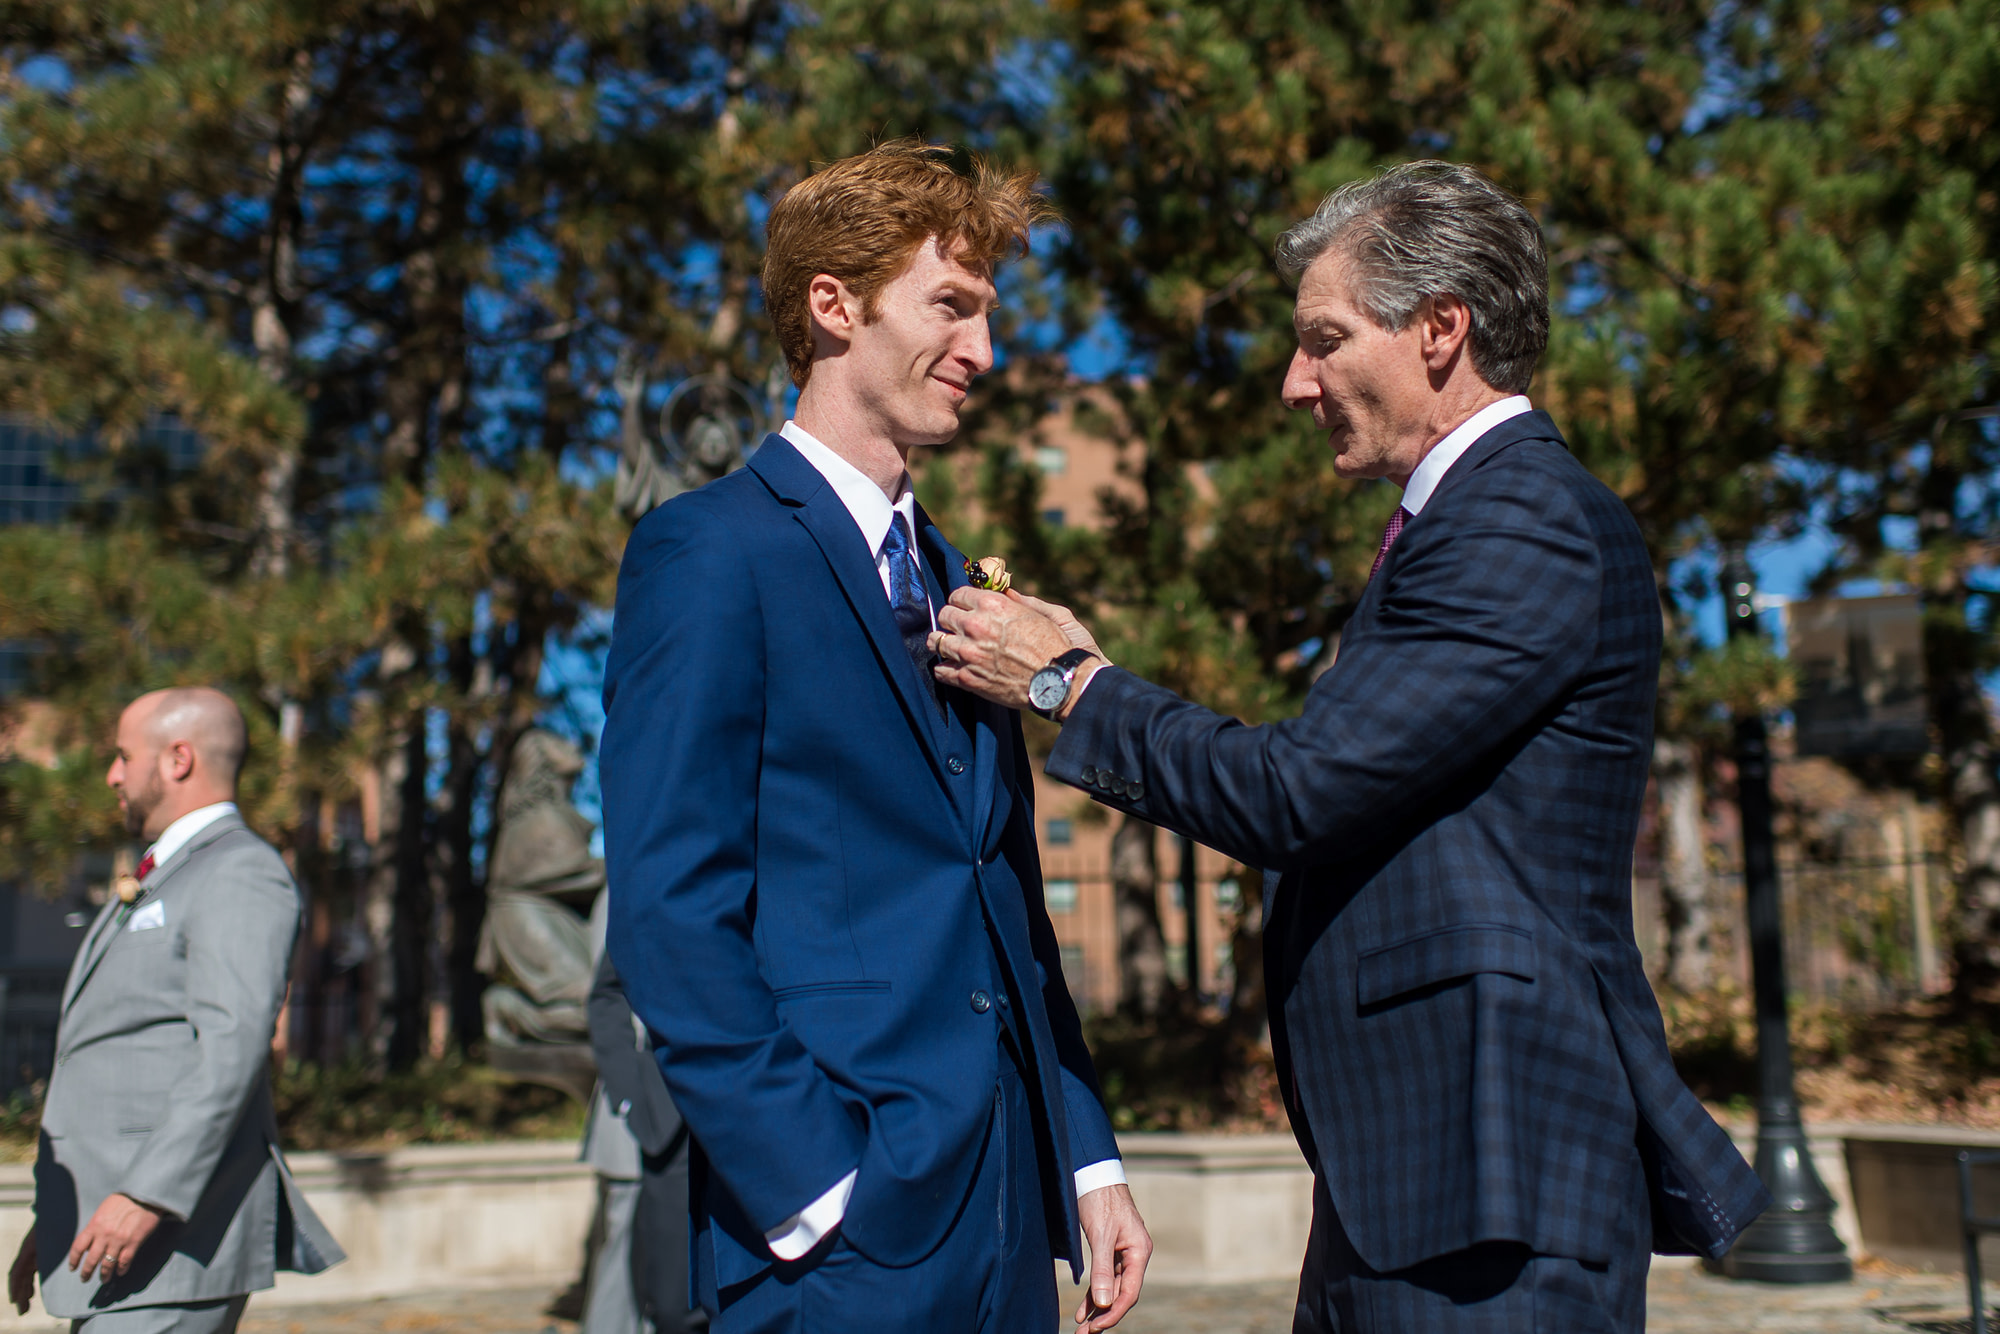 The father of the groom secures his son's boutonnière before his Cathedral Basilica of the Immaculate Conception wedding in Denver, Colorado.